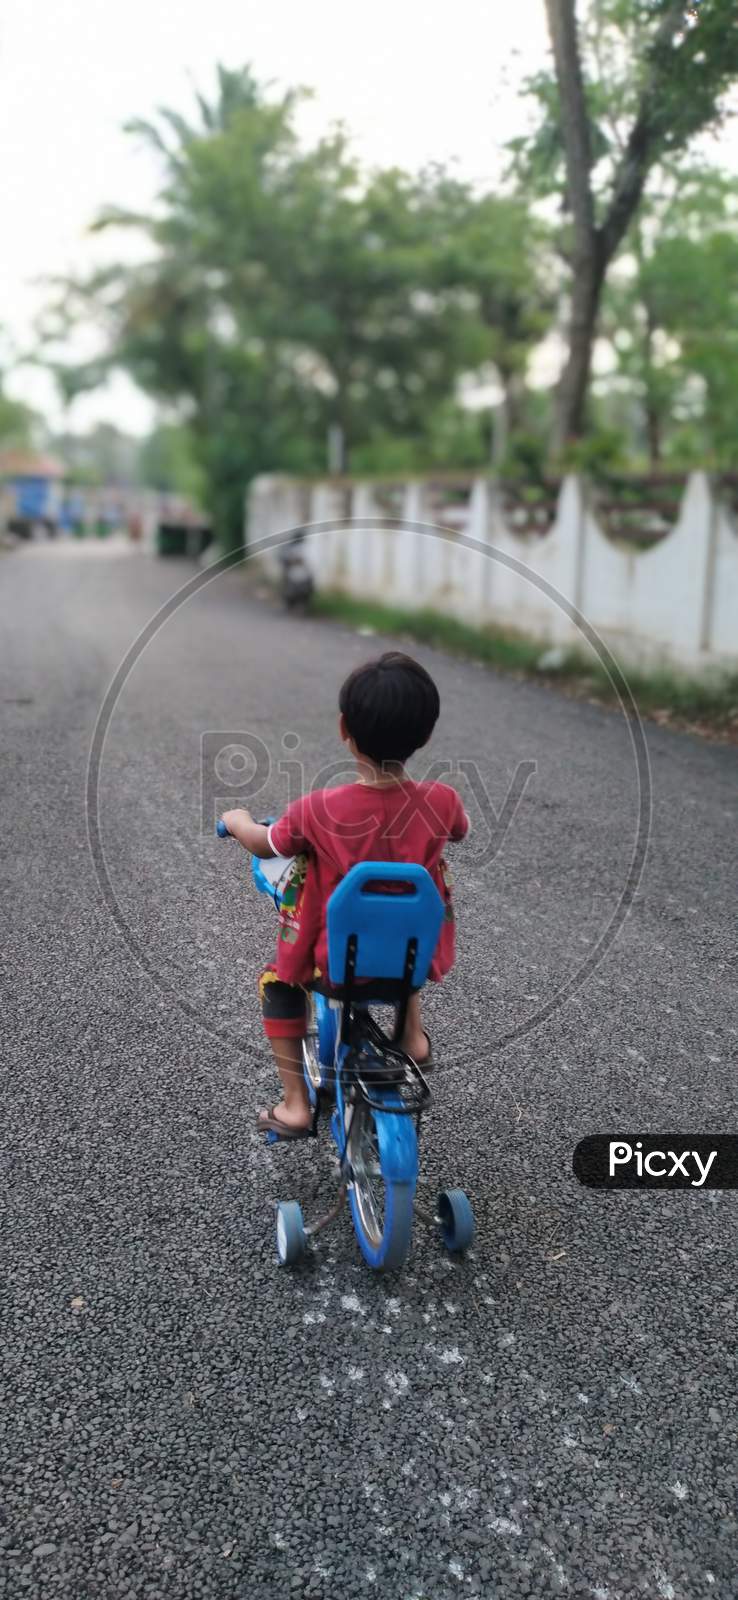 Child on a bicycle